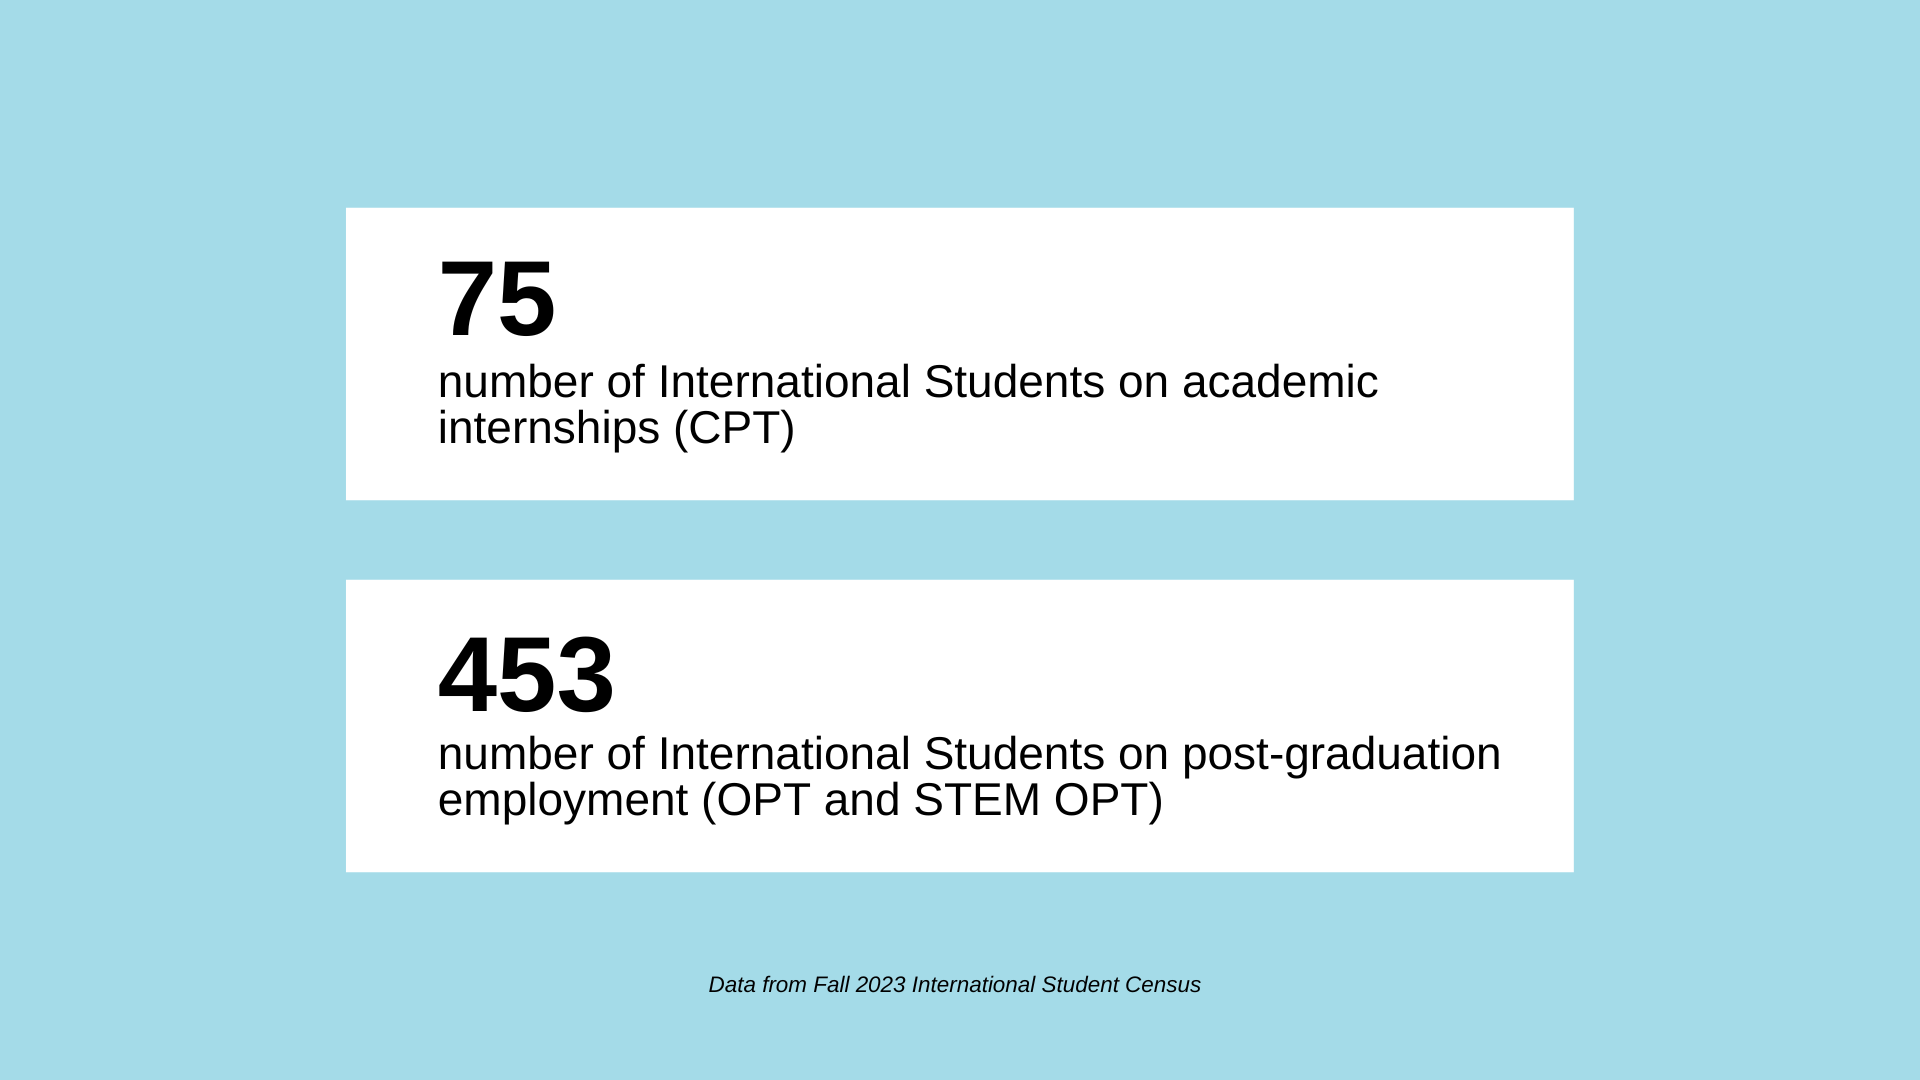 Number of International Students on academic internships (CPT) is 75, on post-graduation employment (OPT and STEM OPT) is 453; data from Fall 2023 International Student Census